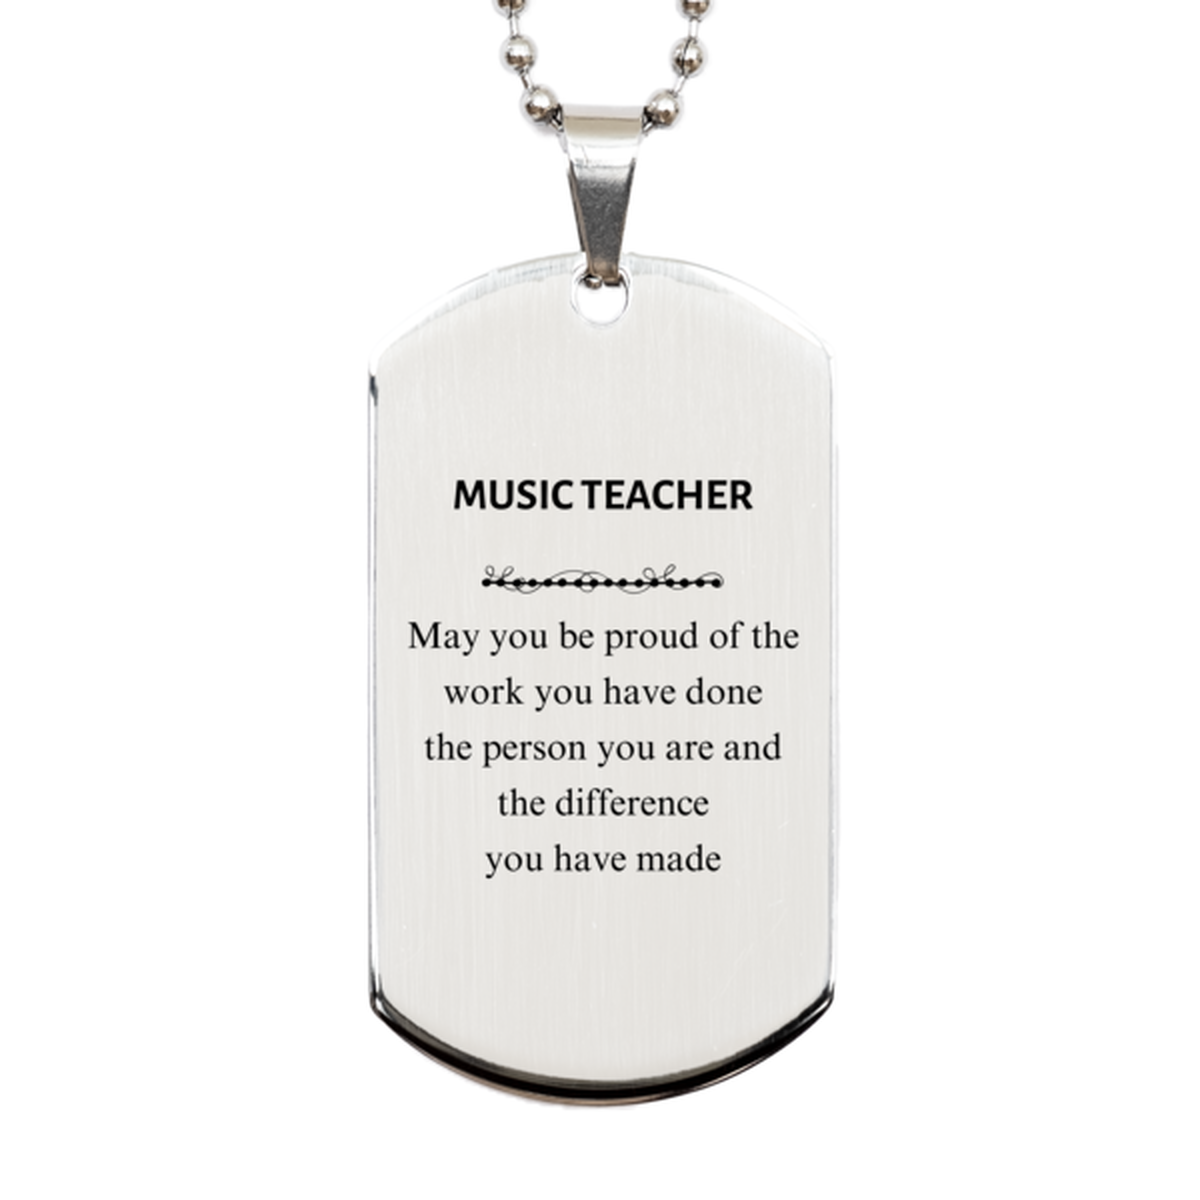 Music Teacher May you be proud of the work you have done, Retirement Music Teacher Silver Dog Tag for Colleague Appreciation Gifts Amazing for Music Teacher